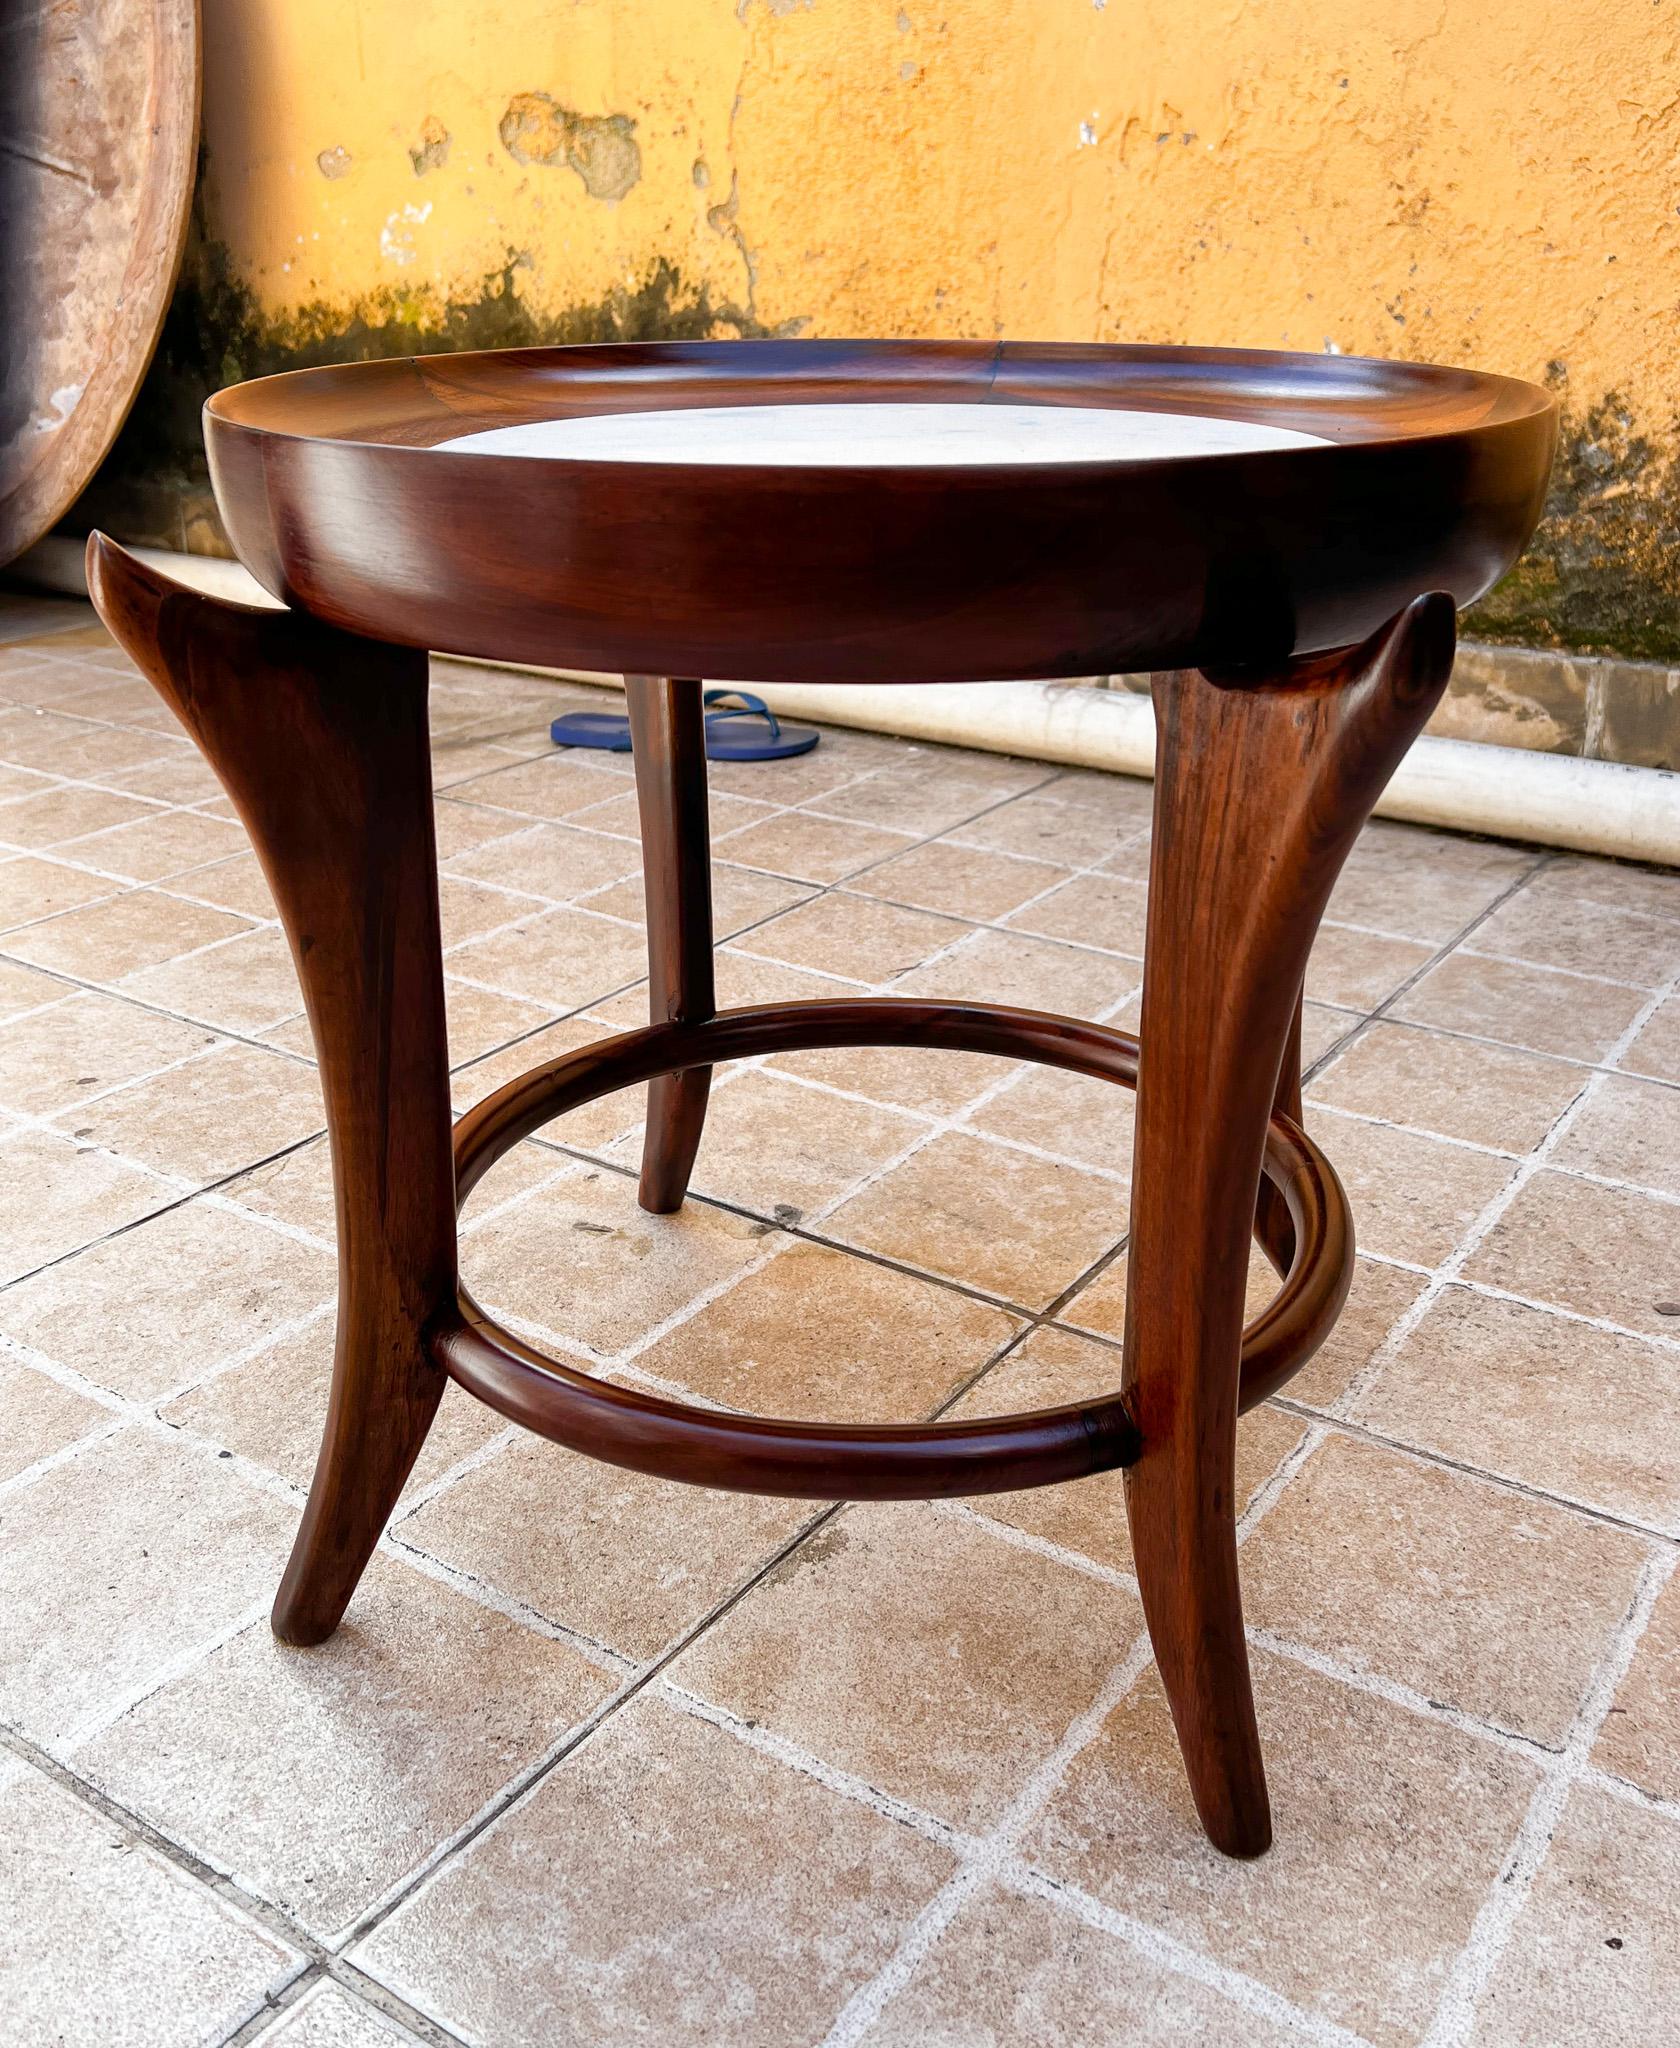 Brazilian Midcentury Modern Side Table in Hardwood & Marble by Giuseppe Scapinelli, 1950's